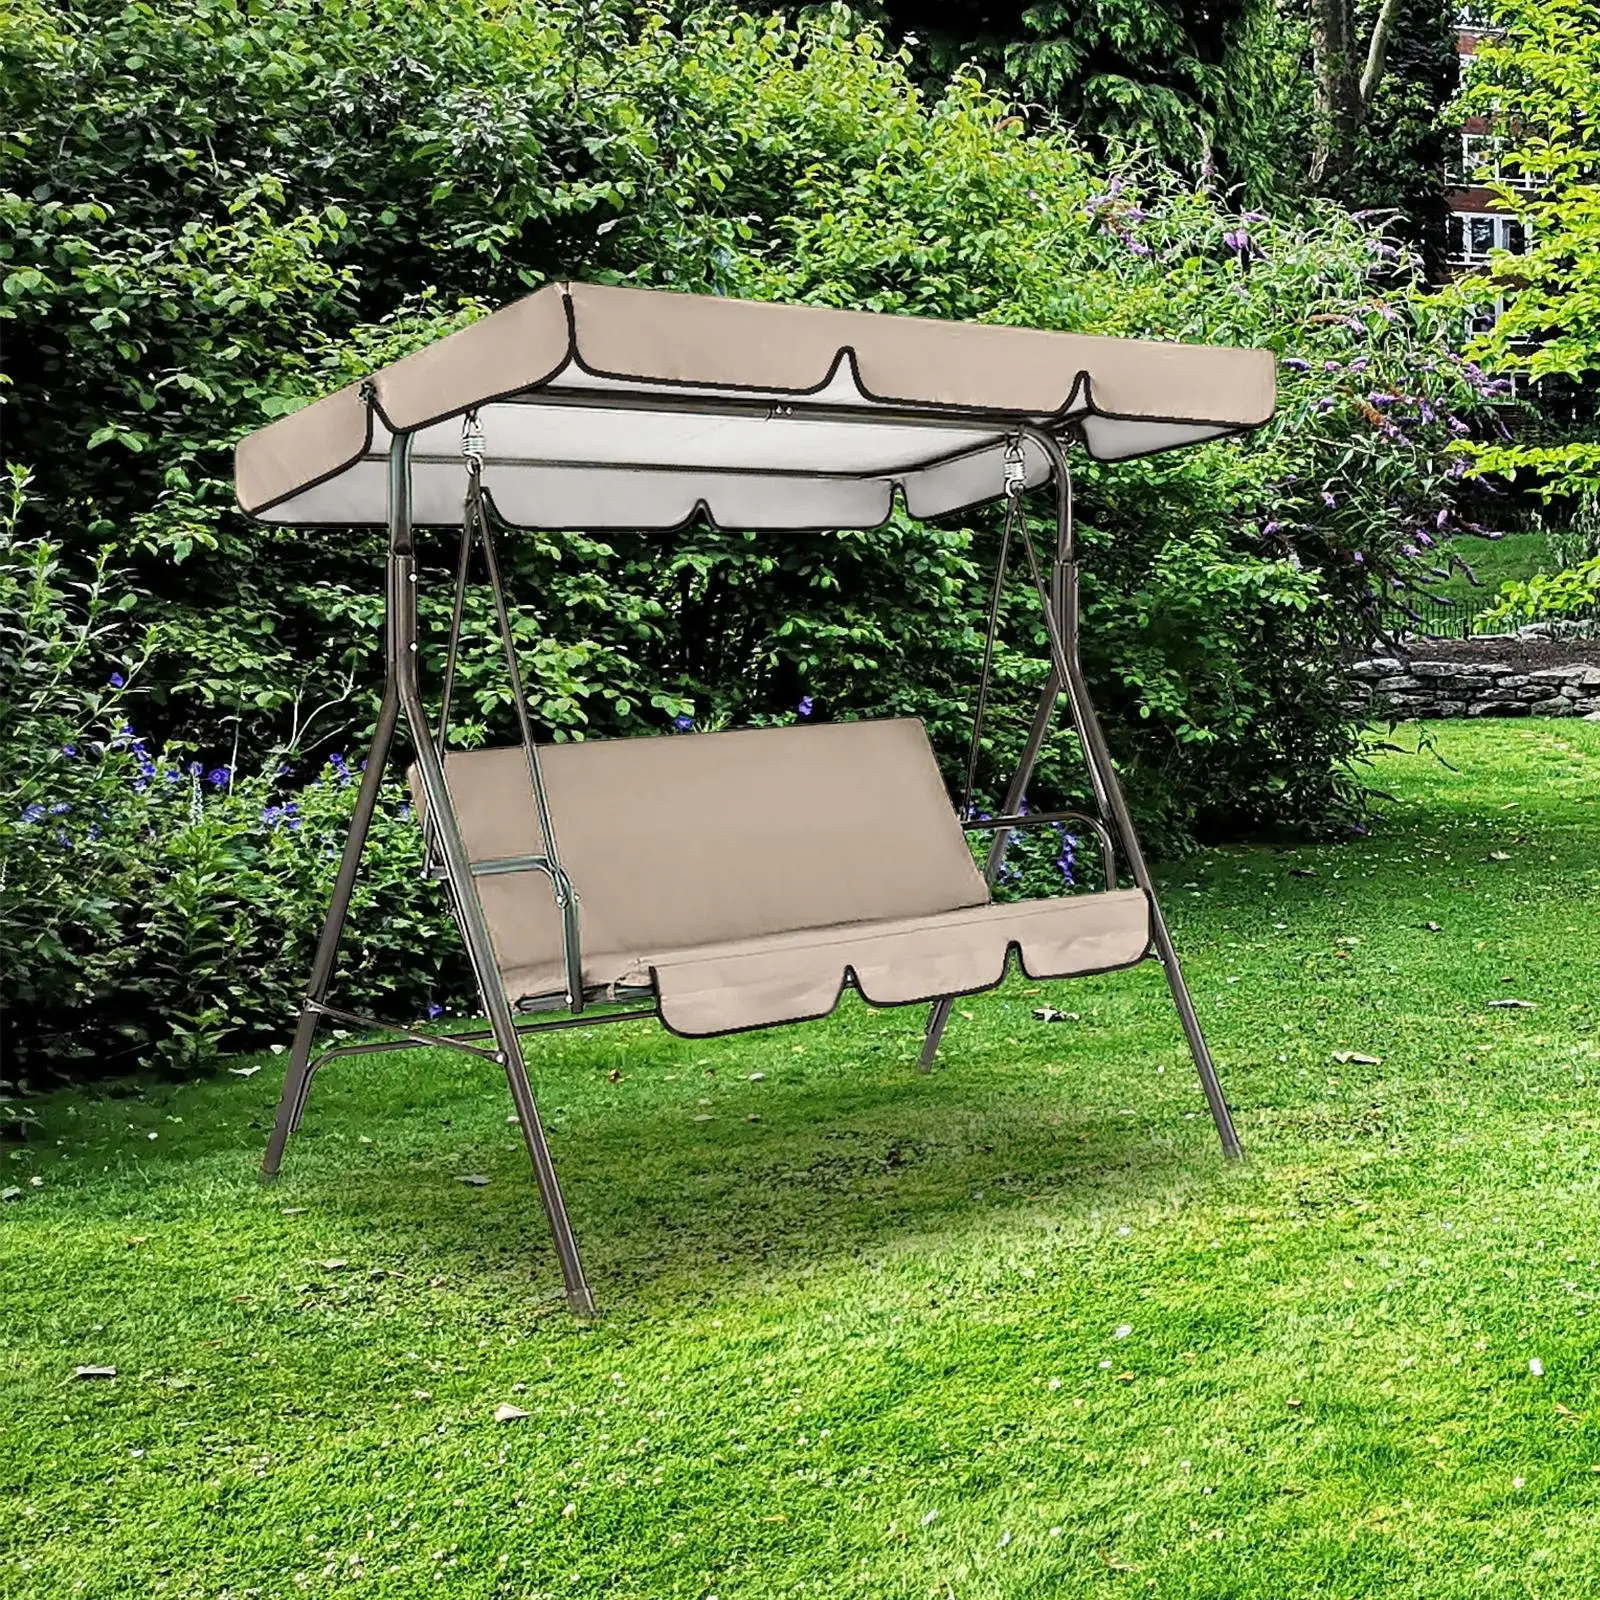 Patio Swing Canopy Replacement Windproof Rainproof Garden Swing Chair Cover Outdoor Garden Furniture Covers for Swing Furniture